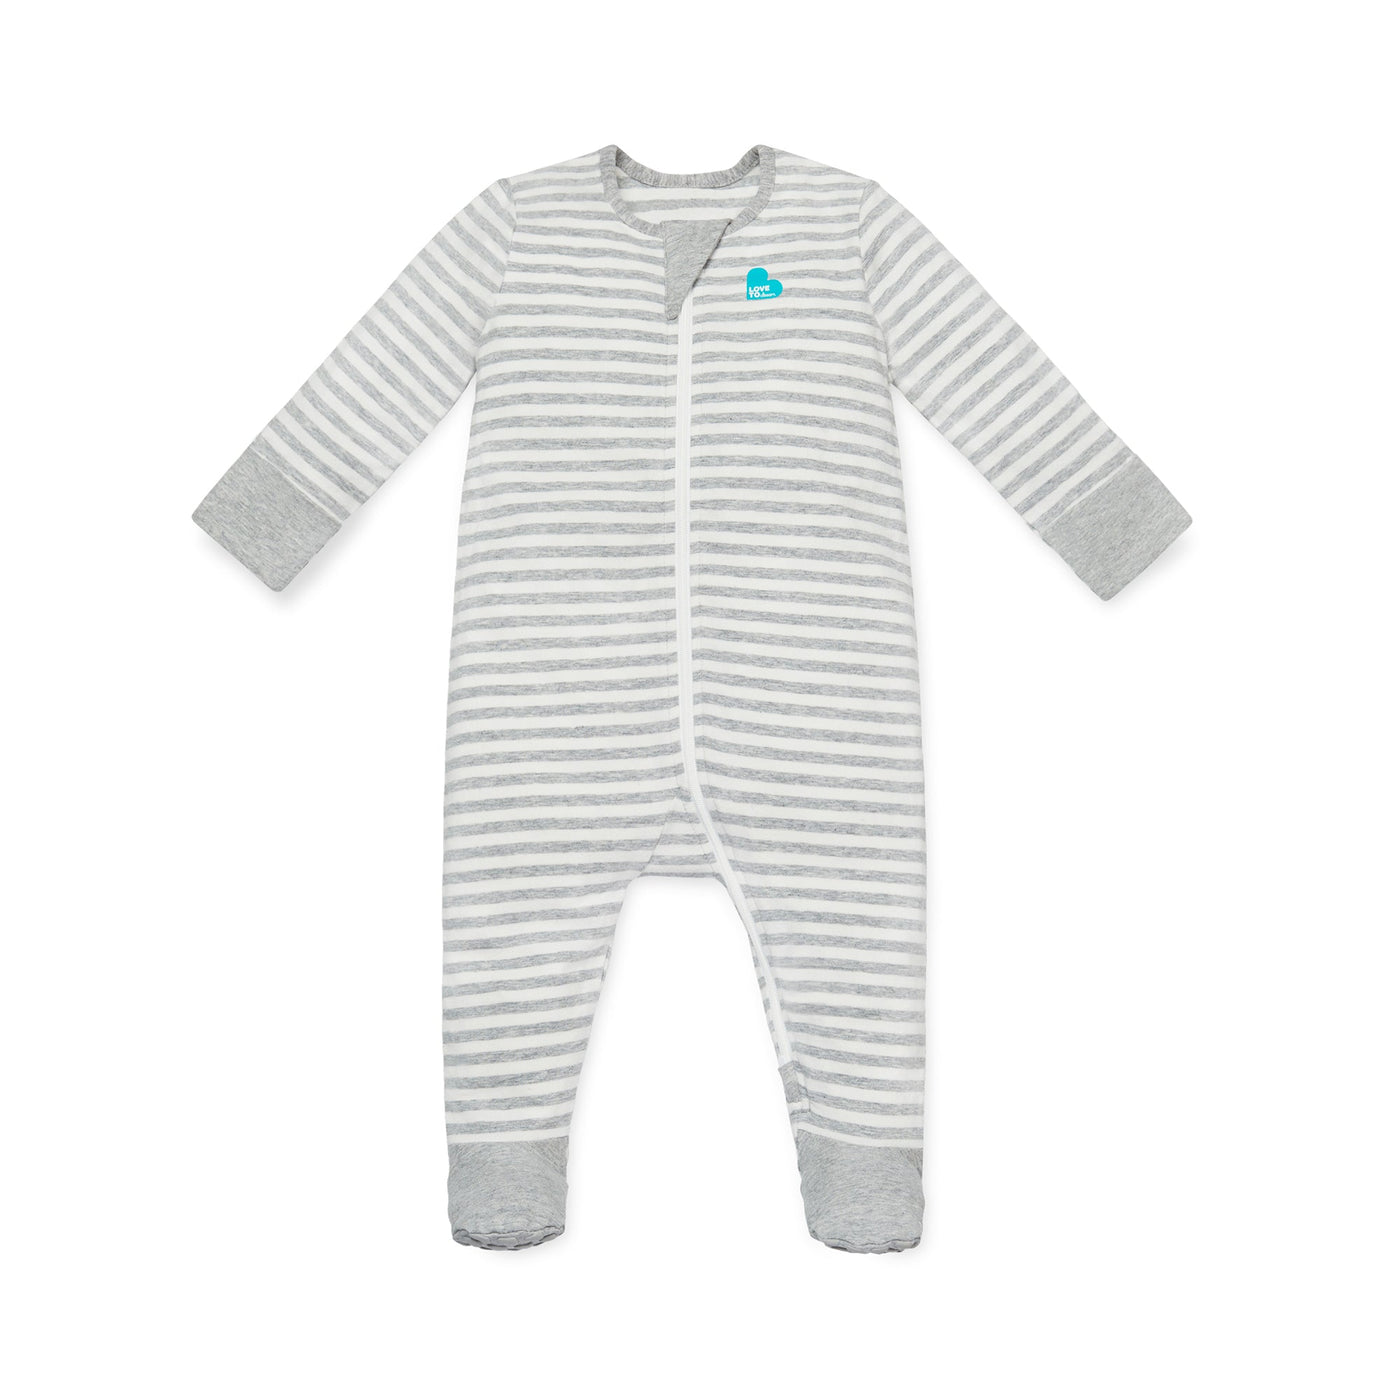 Our Basic Layer-Up Winter Bundle combines the new Love to Dream™ romper & much loved winter Swaddle Up™ 2.5 TOG. The romper can be worn during the day or for naps, as an added layer under the swaddle for those colder nights.